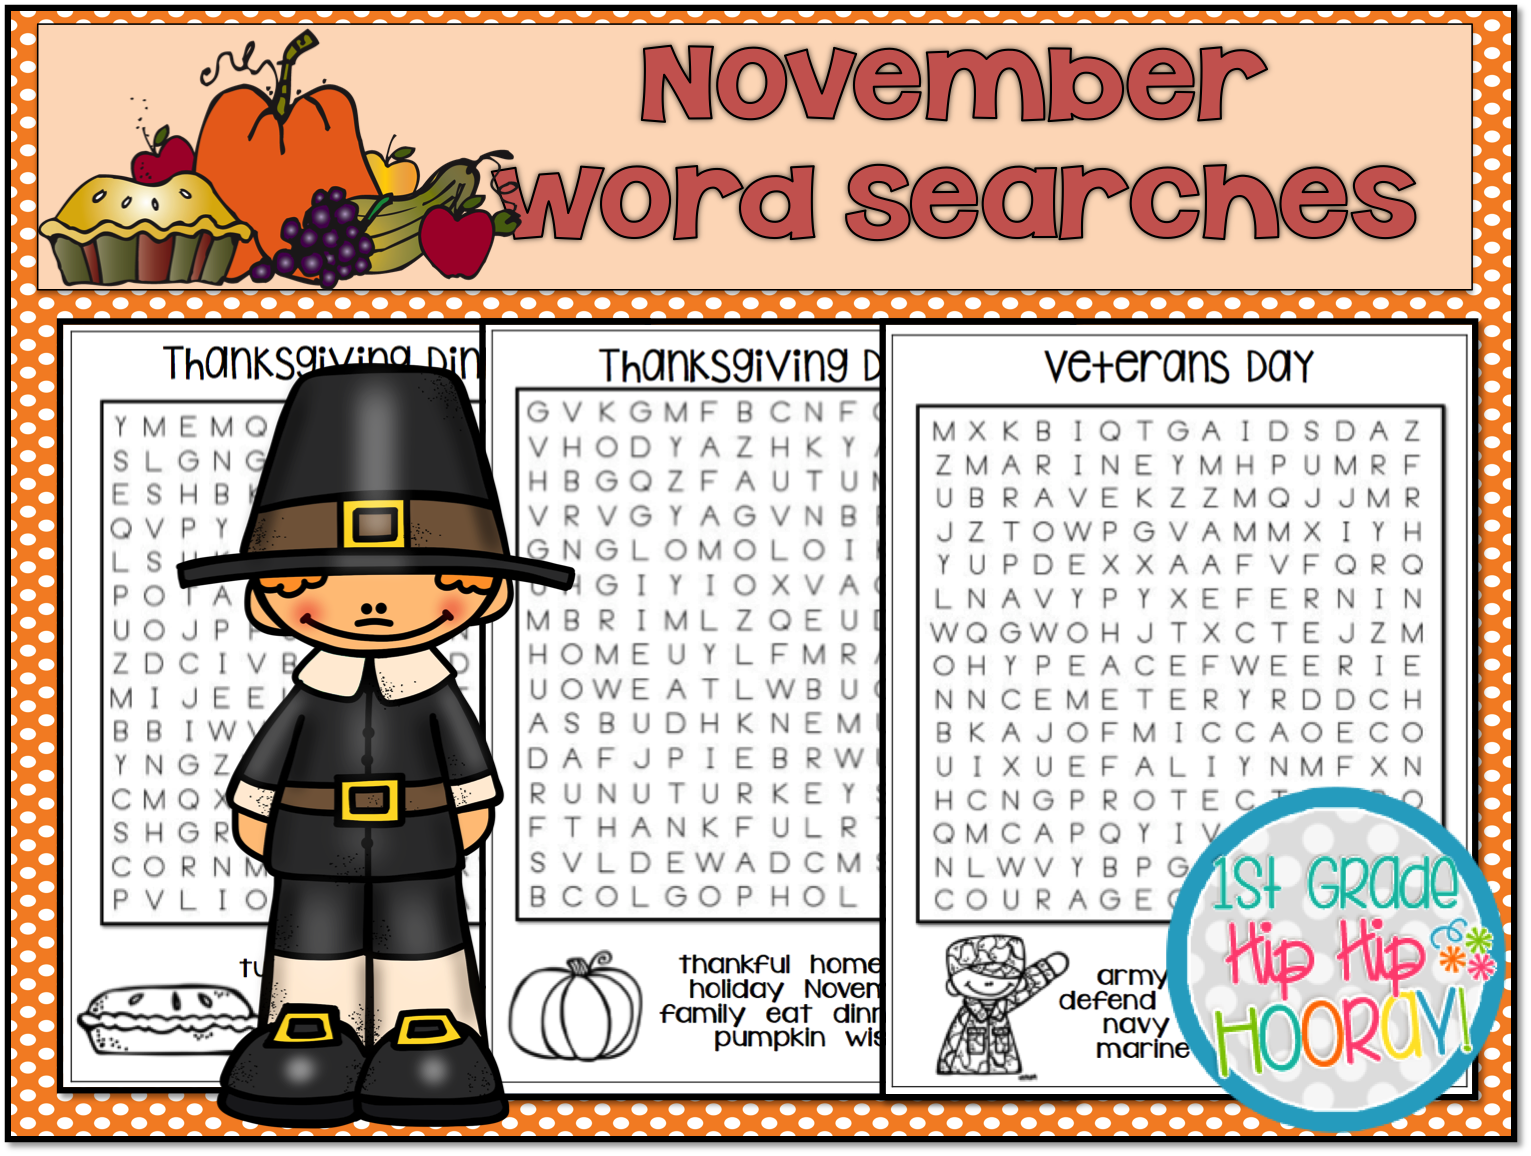 1st Grade Hip Hip Hooray!: November Word Searches...Print and Go!